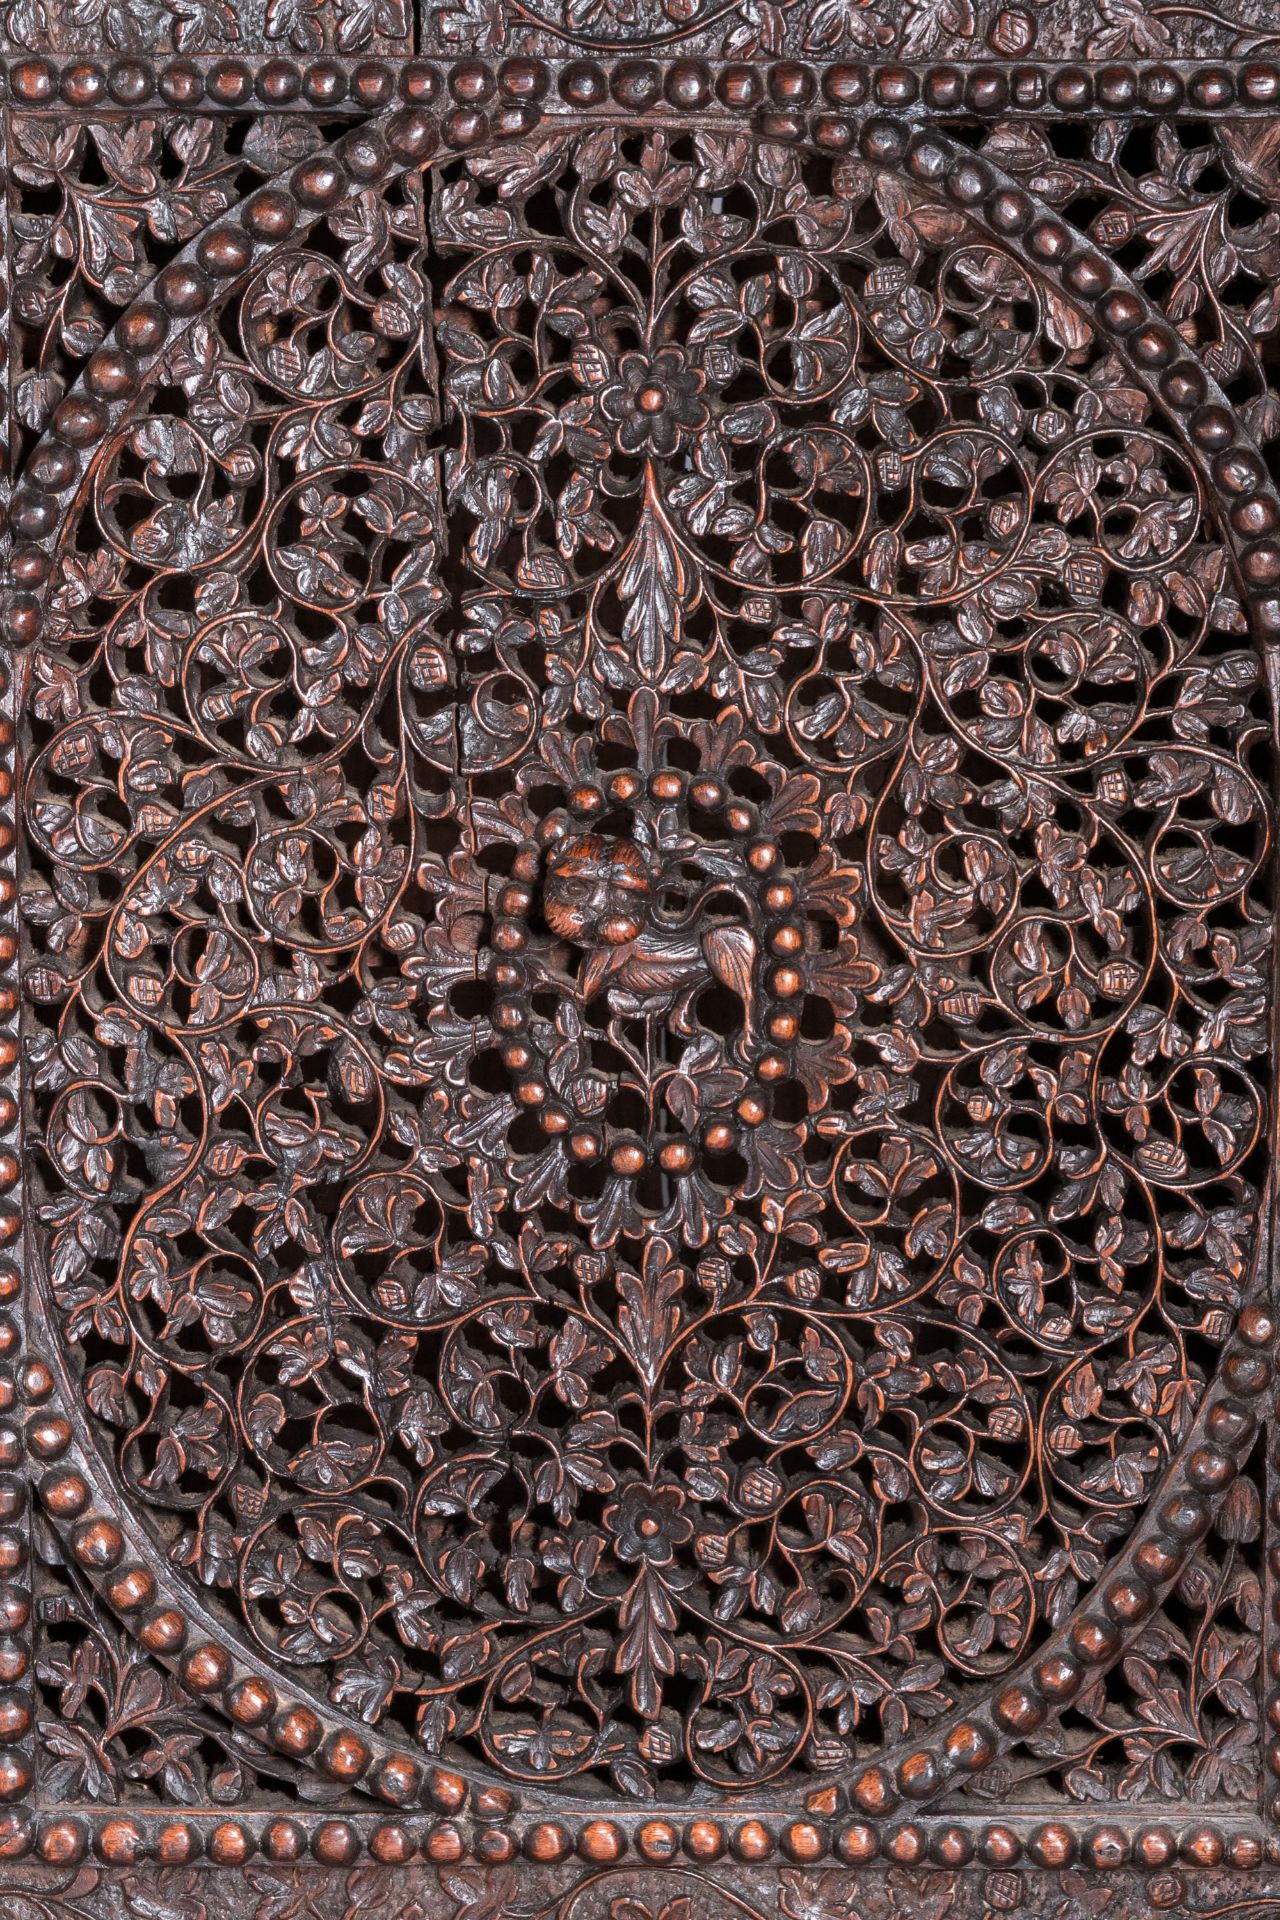 A colonial Anglo-Indian reticulated wooden desk with hidden compartment, 19th C. - Image 18 of 24